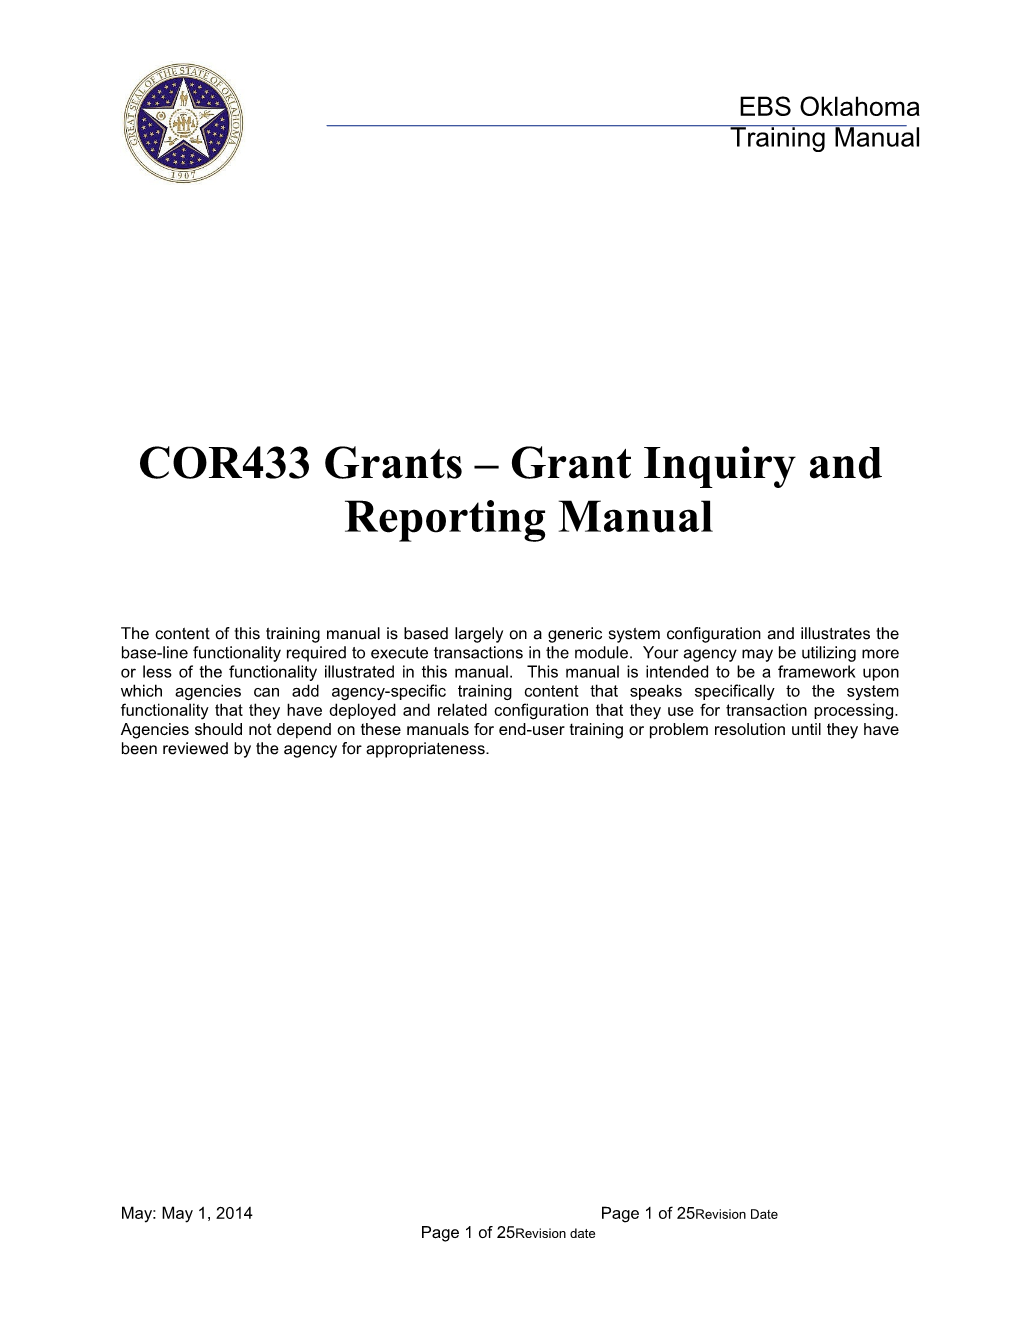 COR 433 Grants Inquiry and Reporting Manual